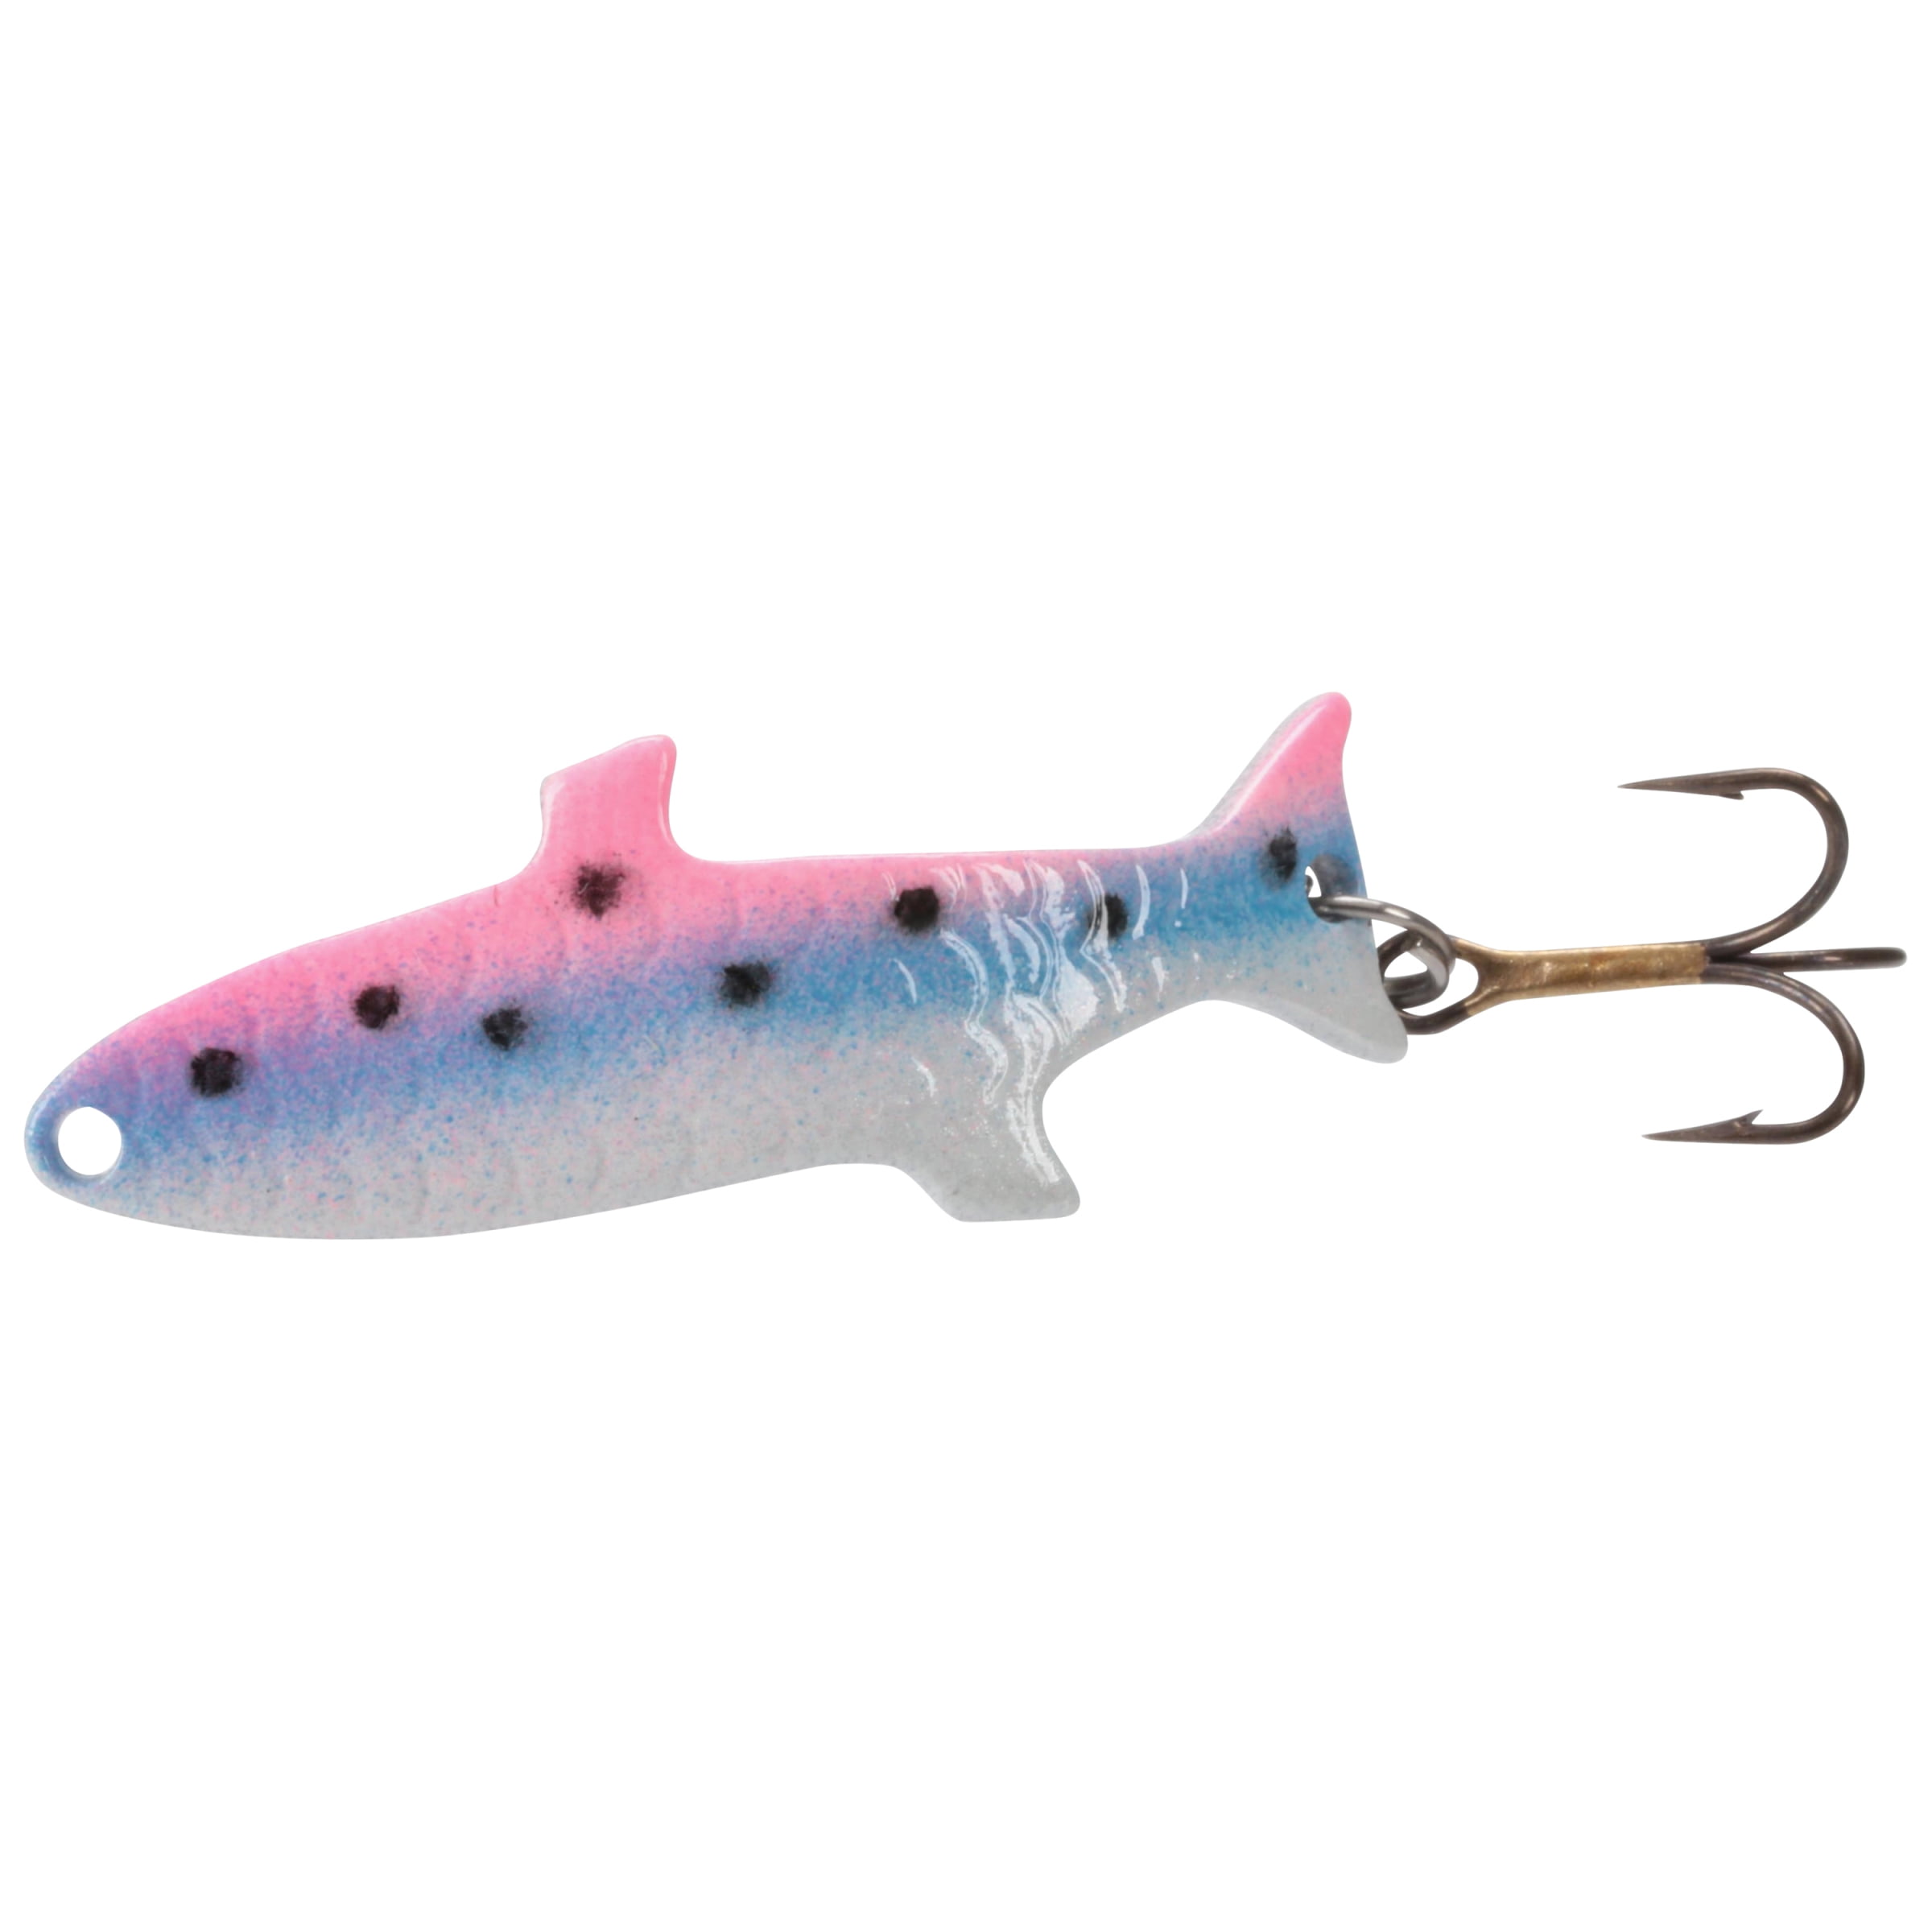 Acme Tackle Phoebe Fishing Lure Spoon Rainbow Trout 1/12 oz.